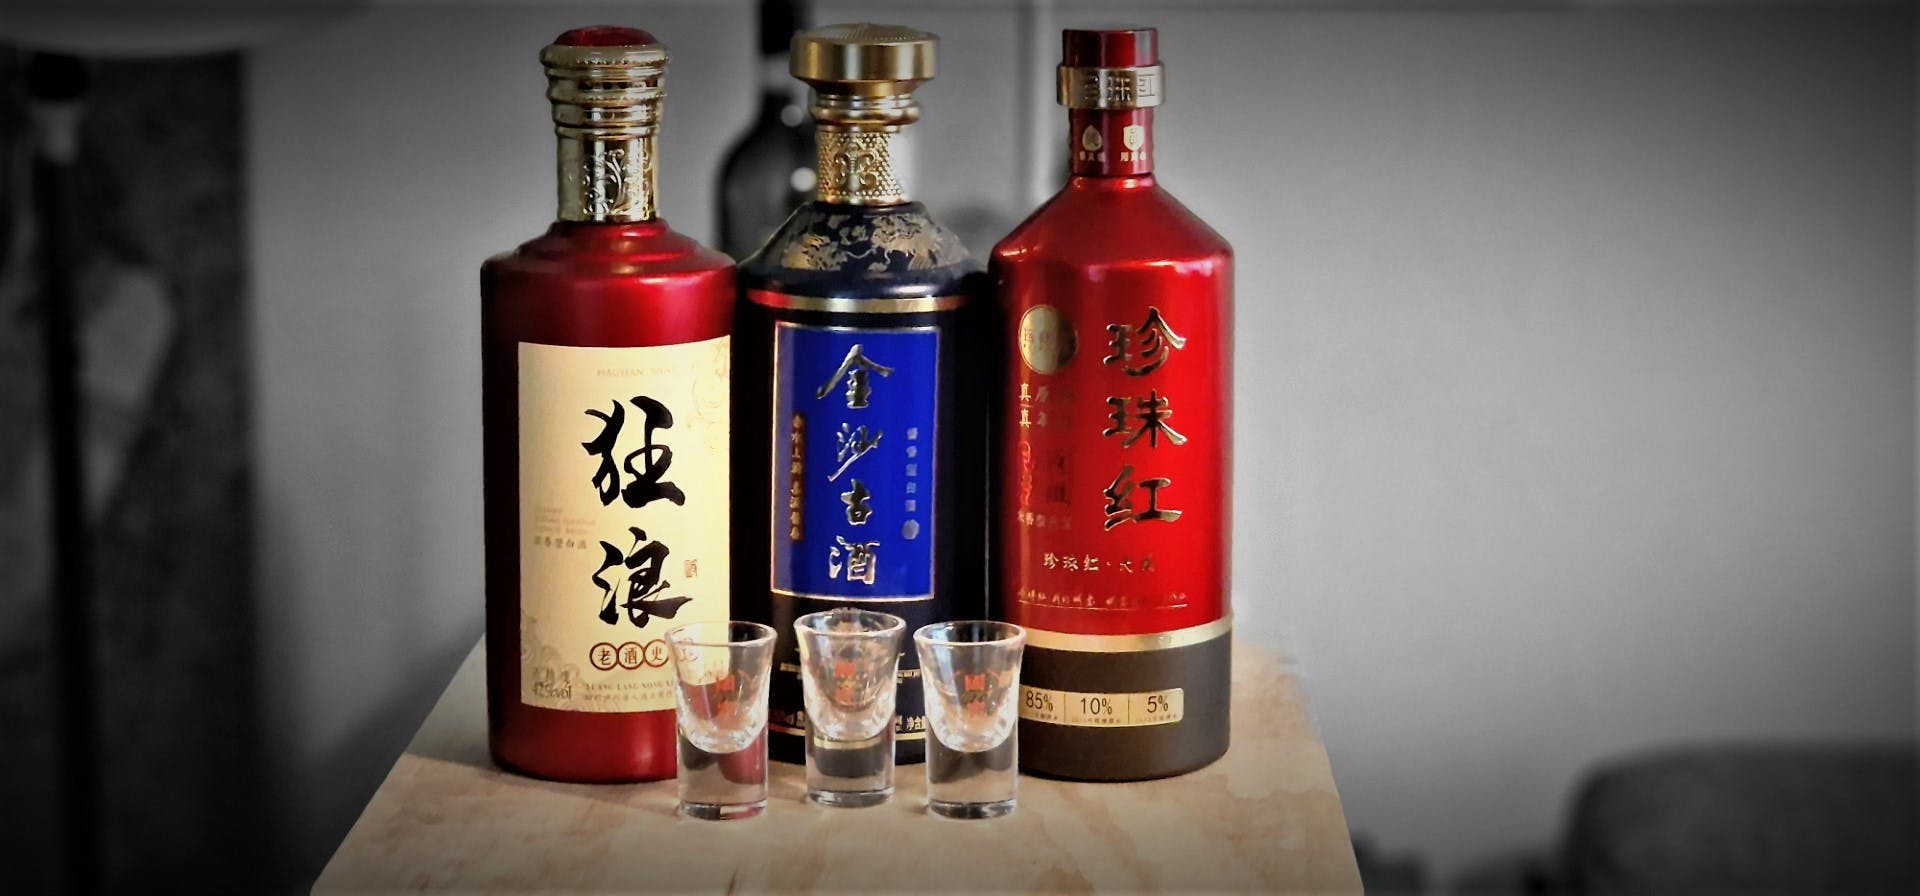 Pear Red Epic Spirits Rice Aroma, Pear Red Epic Spirits Rice Aroma, Diamond 5 Star Sauce Aroma